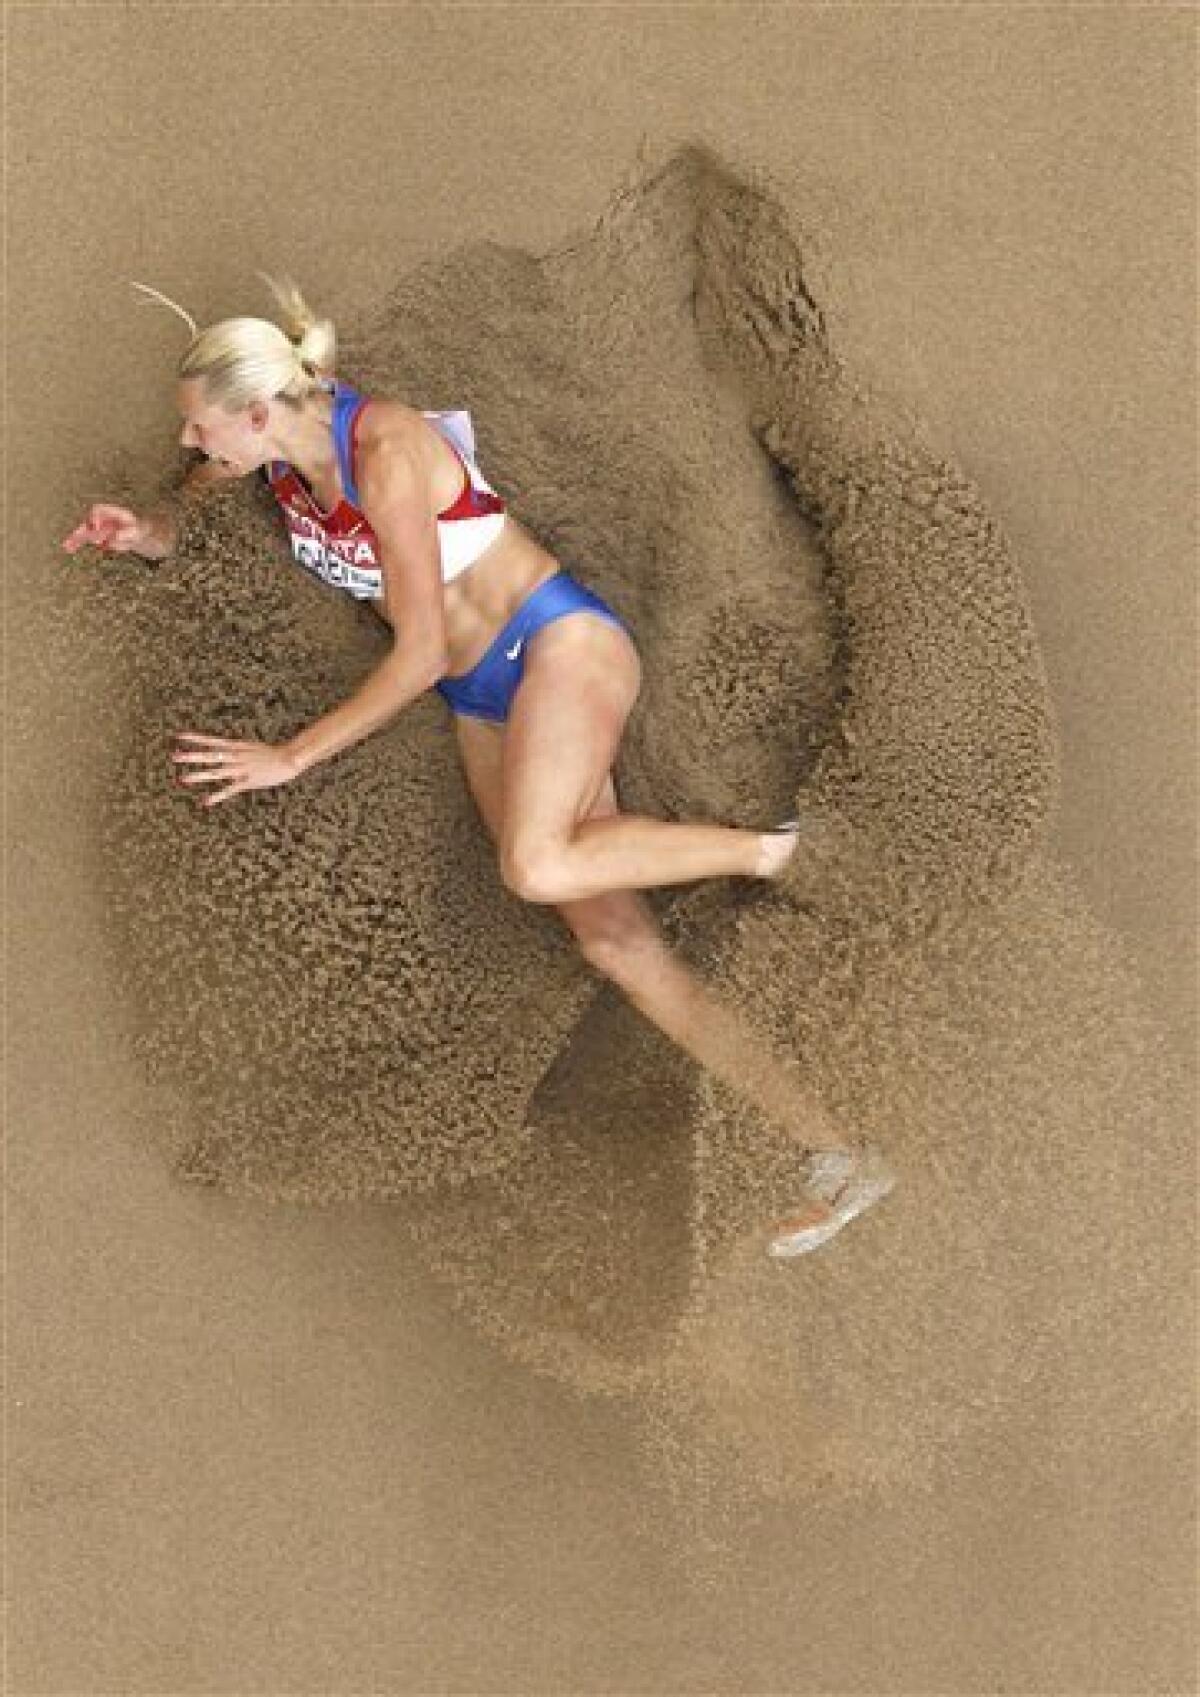 Russia's Tatyana Chernova lands in the sand pit in the Heptathlon Long Jump at the World Athletics Championships in Daegu, South Korea, Tuesday, Aug. 30, 2011. (AP Photo/Kevin Frayer)